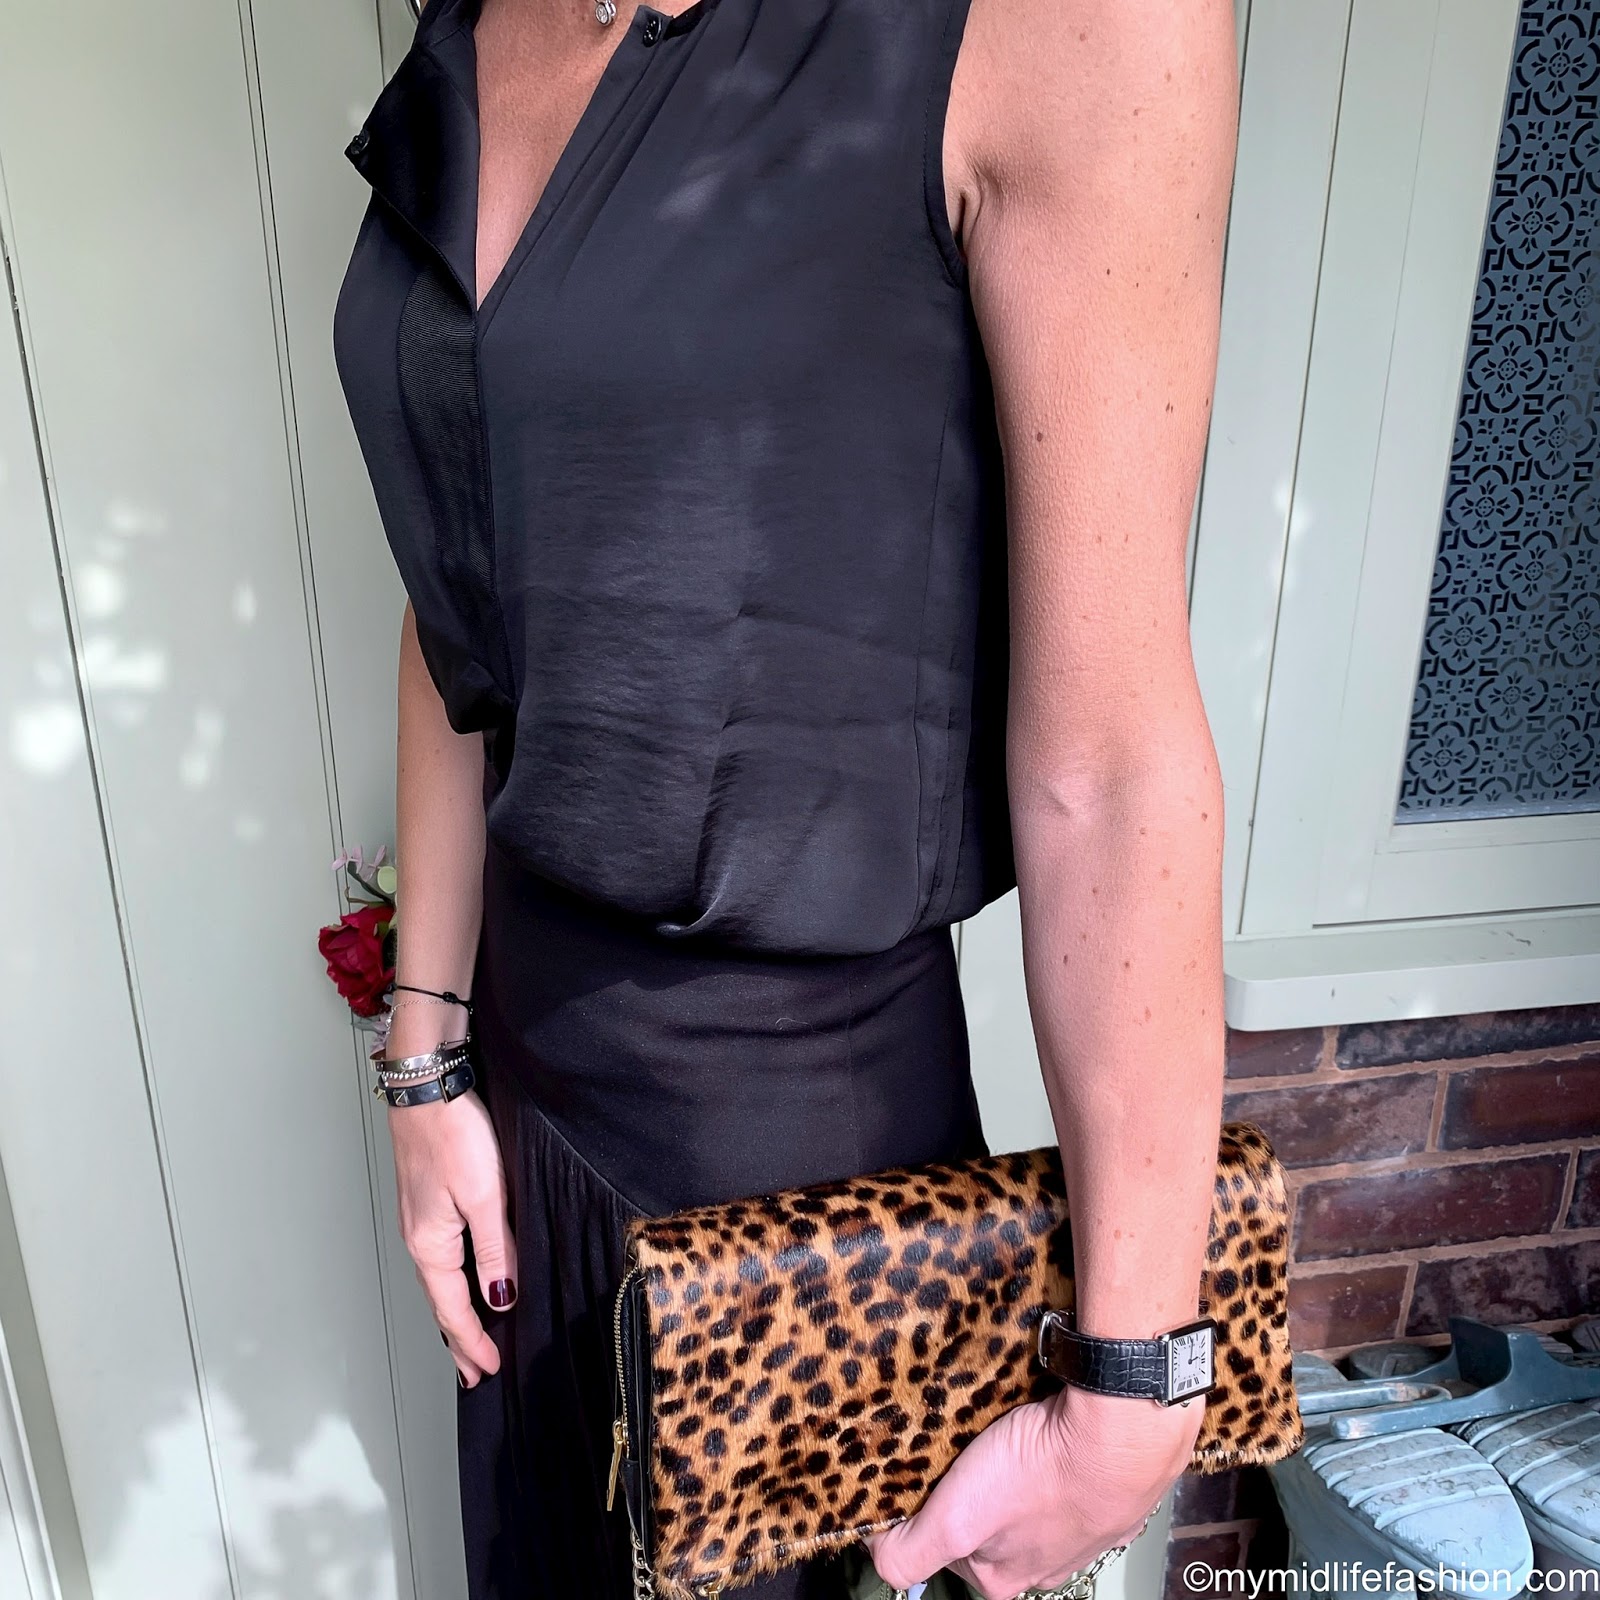 my midlife fashion, Cabi clothing, Cabi clothing expedition jacket, Cabi clothing snap blouse, Cabi clothing cruise skirt, hush kitten heel leopard print ankle boots, app leopard print clutch